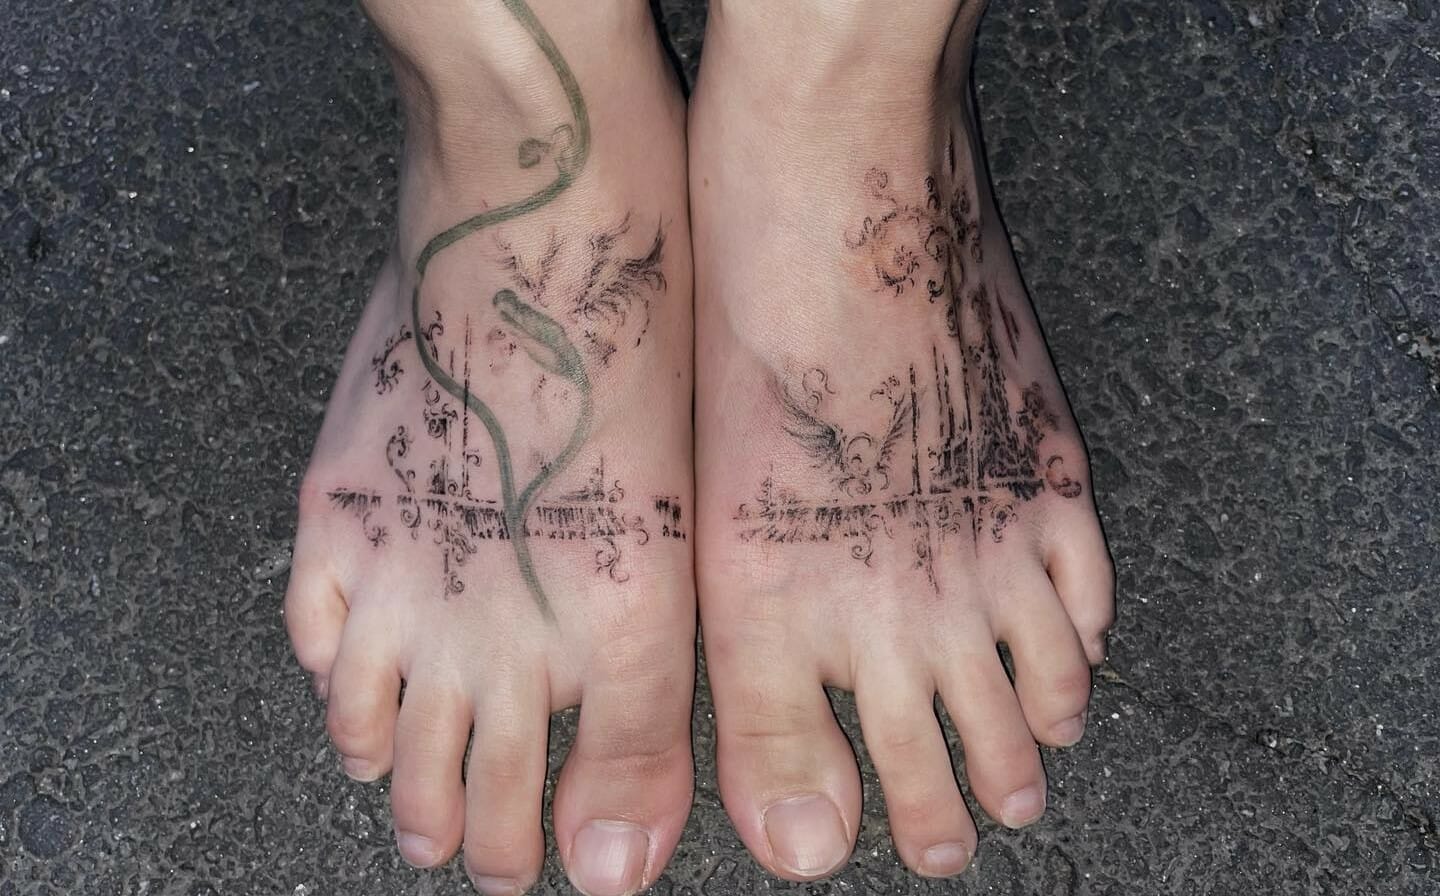 Pin by Rahina A. on Body art | Cute foot tattoos, Foot tattoos girls, Foot  tattoos